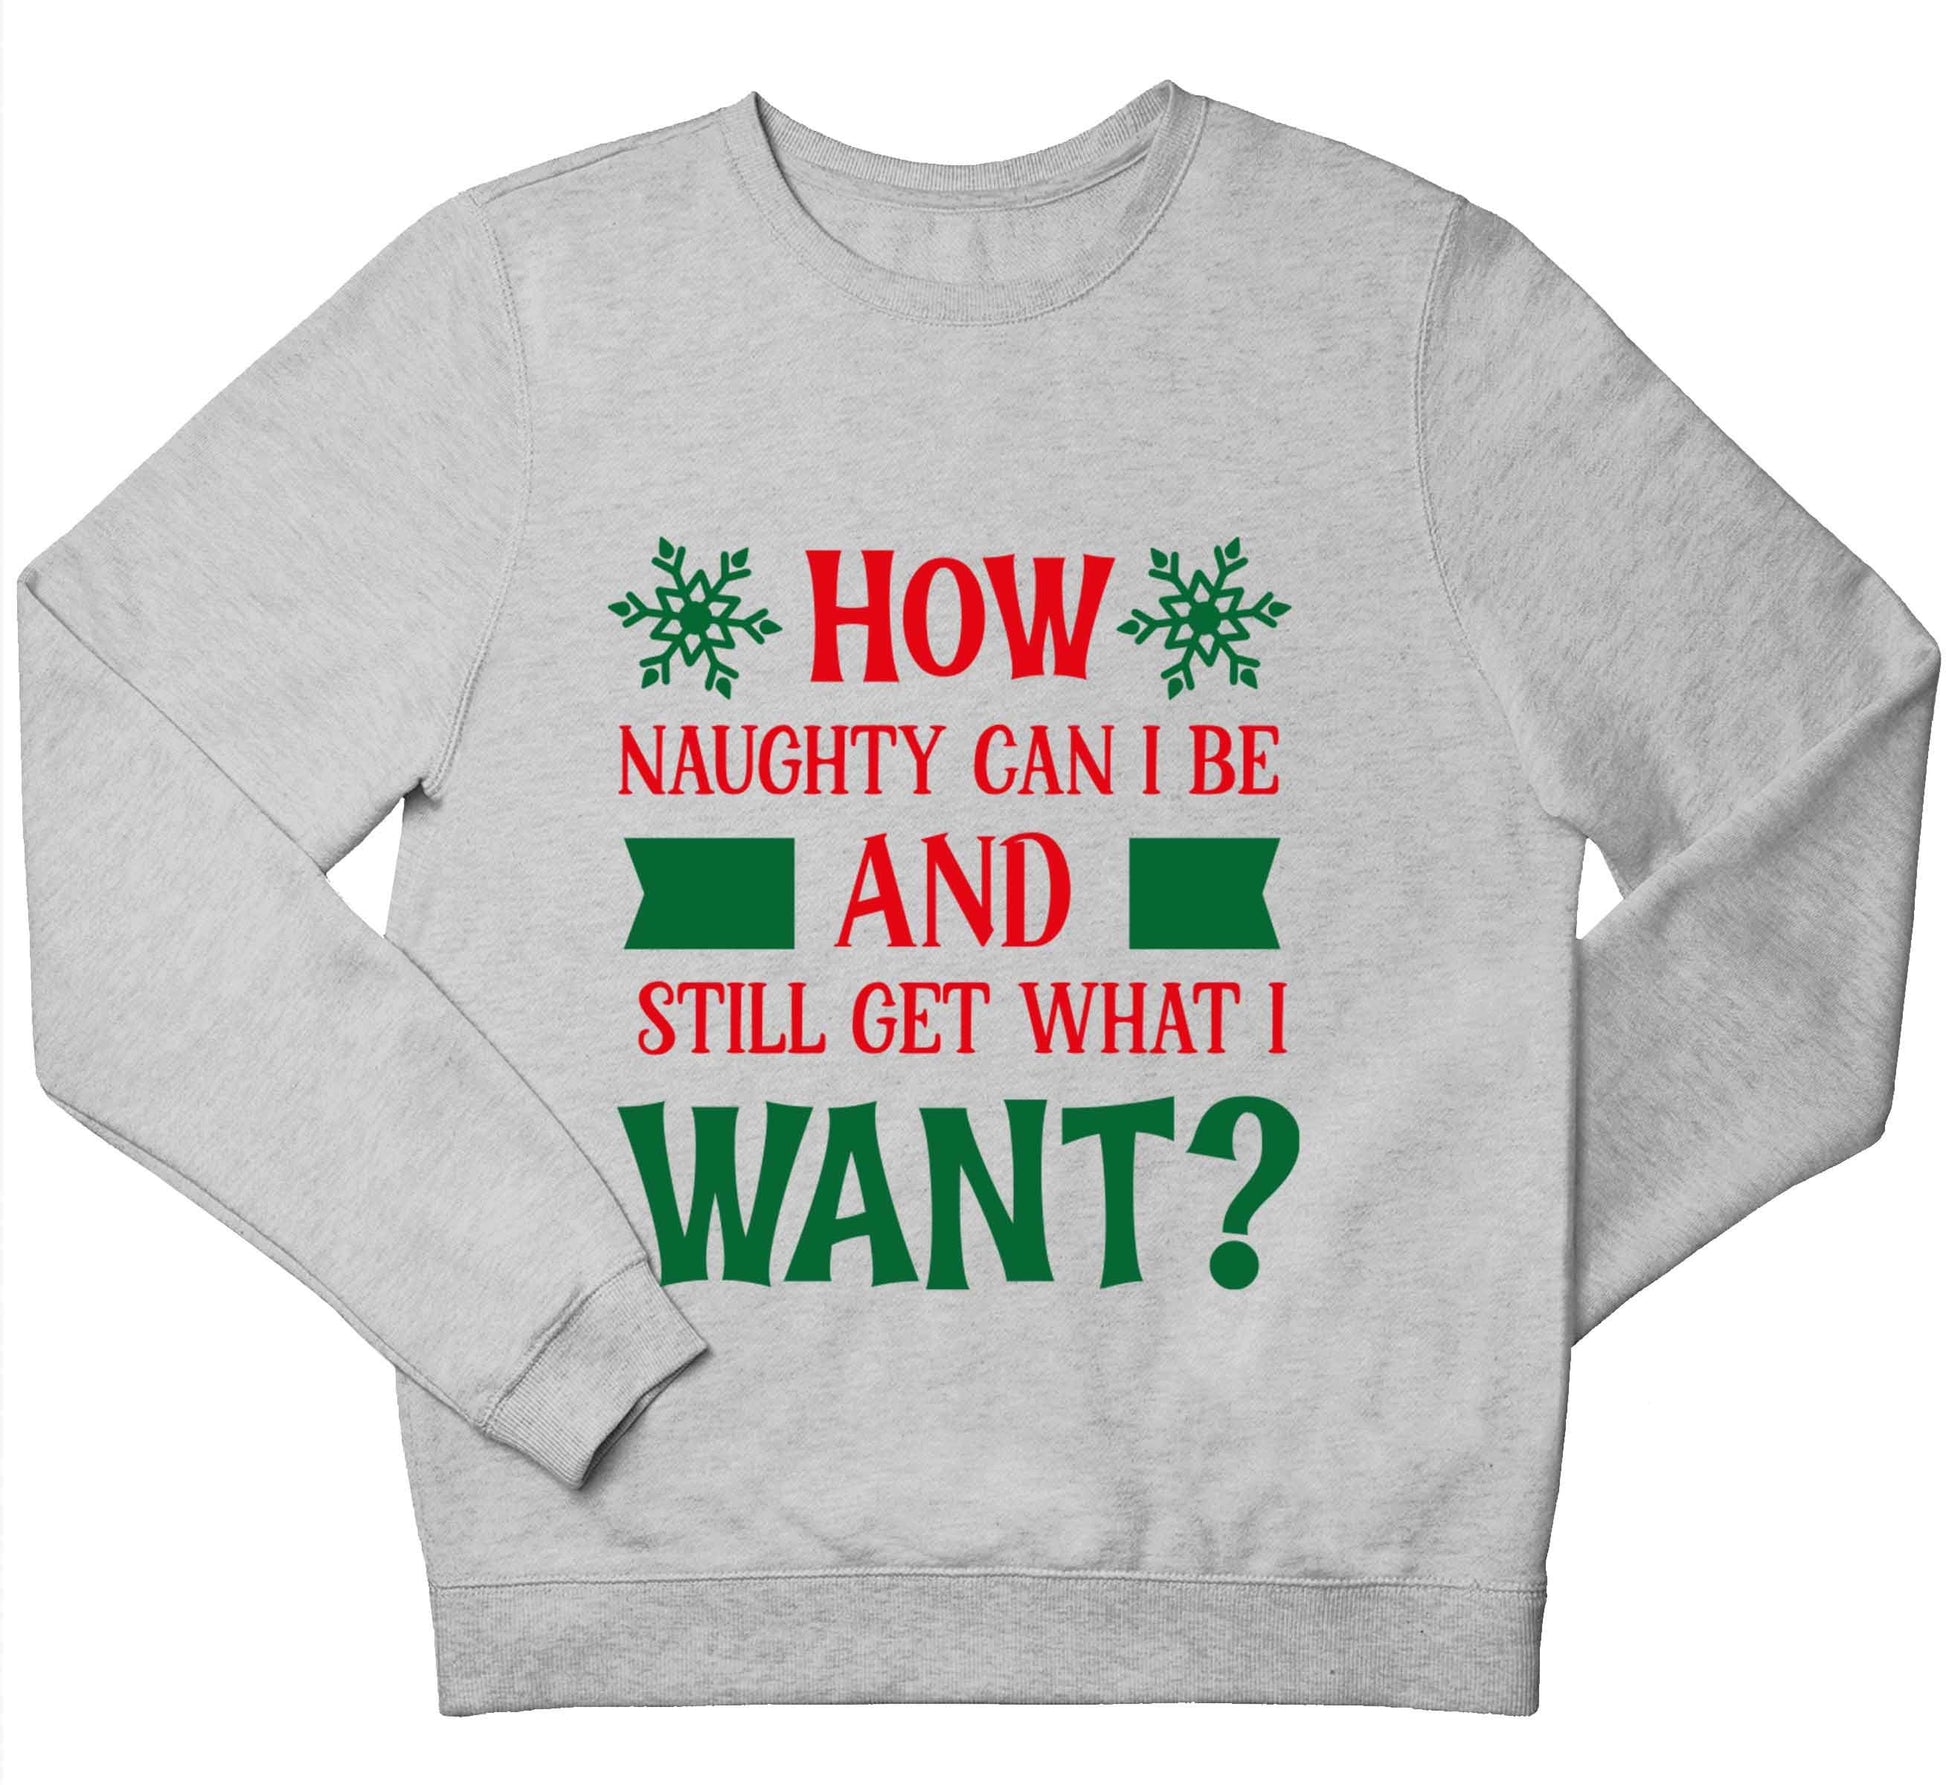 How naughty can I be and still get what I want? children's grey sweater 12-13 Years